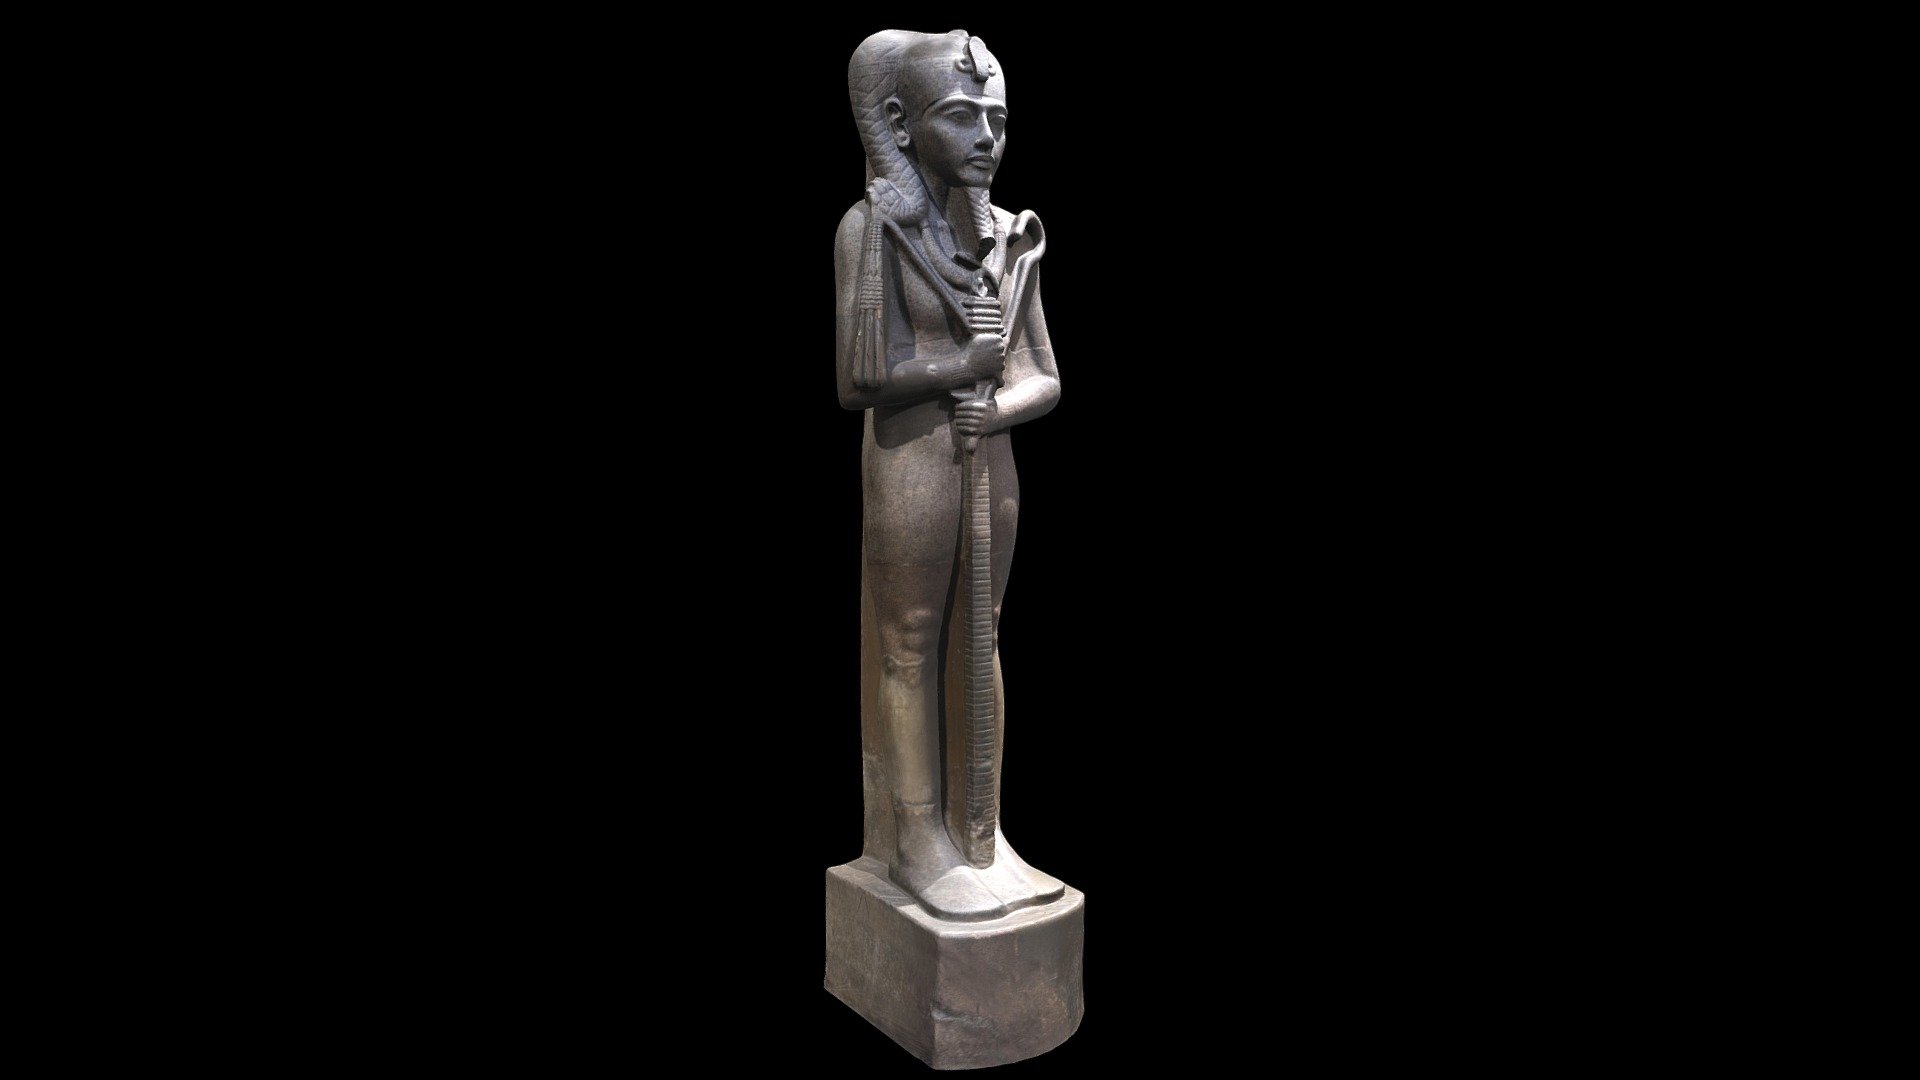 Granite statue of the god Khonsu with the features of Tutankhamun.  Eighteenth Dynasty.  Original found in the Temple of Khonsu at Karnak.  On display for years in the Egyptian Museum in Cairo (CG 38488) and now on display in the National Museum of Egyptian Civilization (NMEC) in Cairo (NMEC 838).  Height is 2.52 m. Photographed in November 2022.

Created from 124 photographs (Canon EOS Rebel T7i) using Metashape 1.8.4 3d model